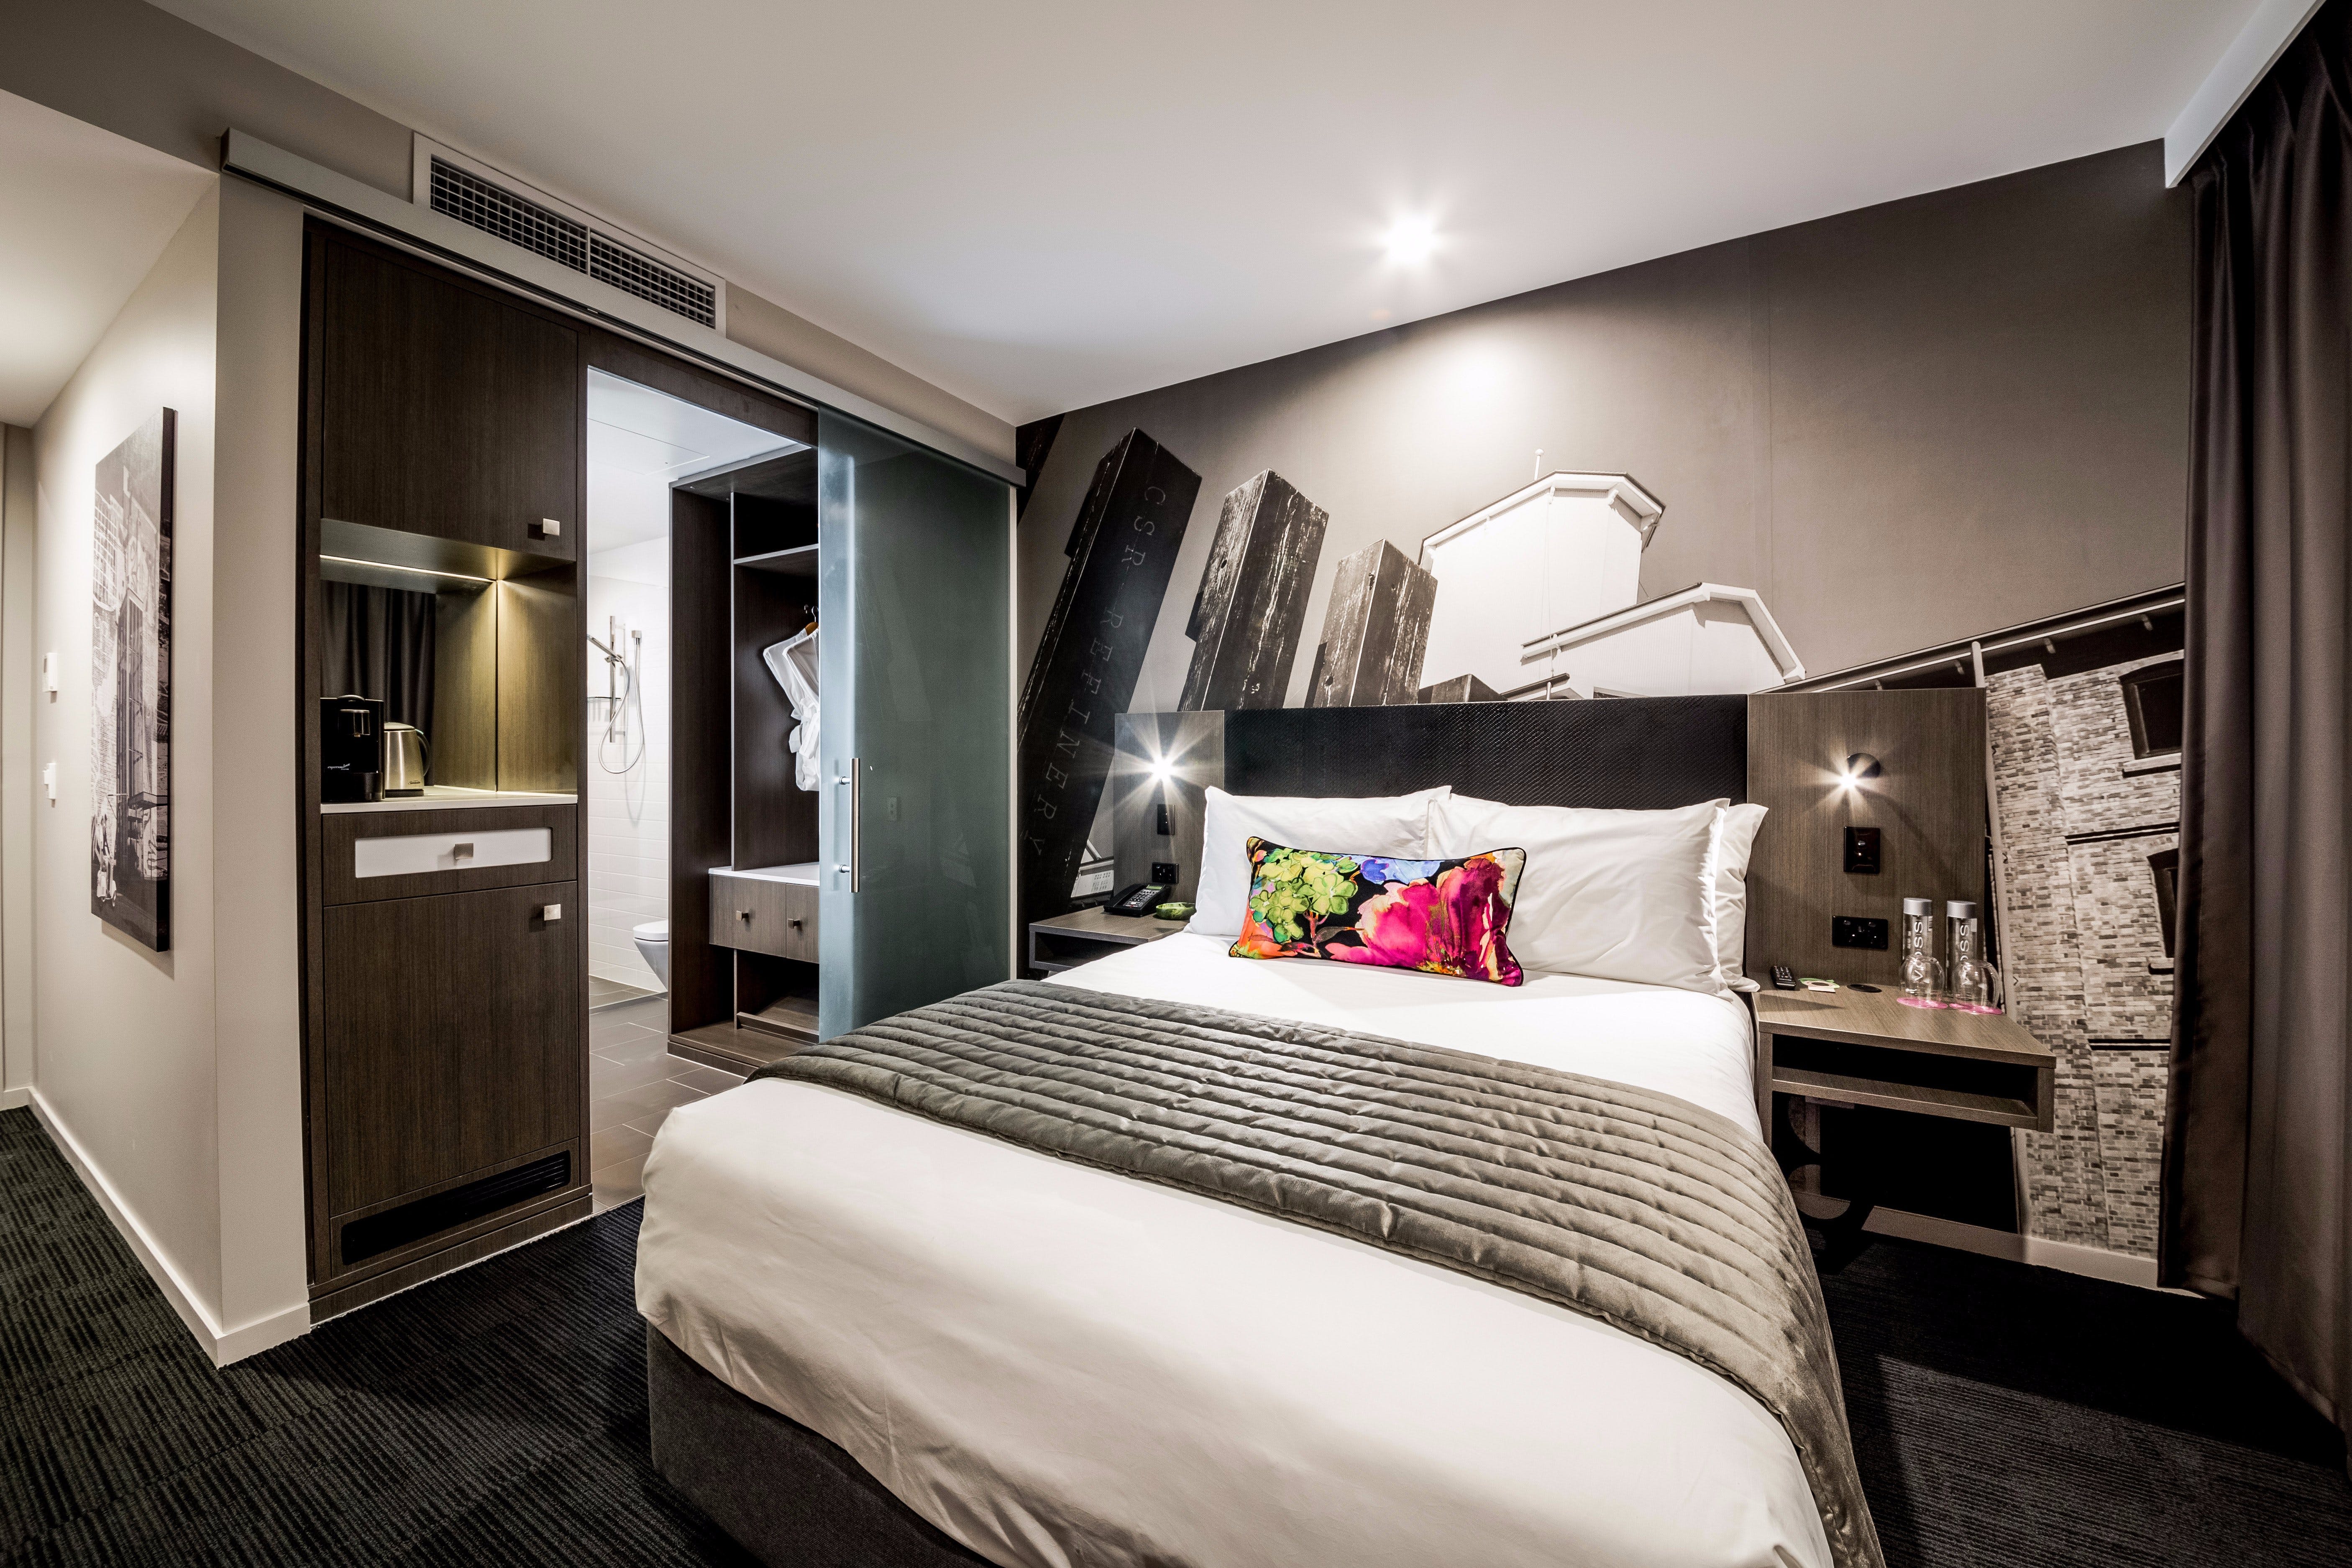 Sage Hotel James Street - Accommodation Bookings 0